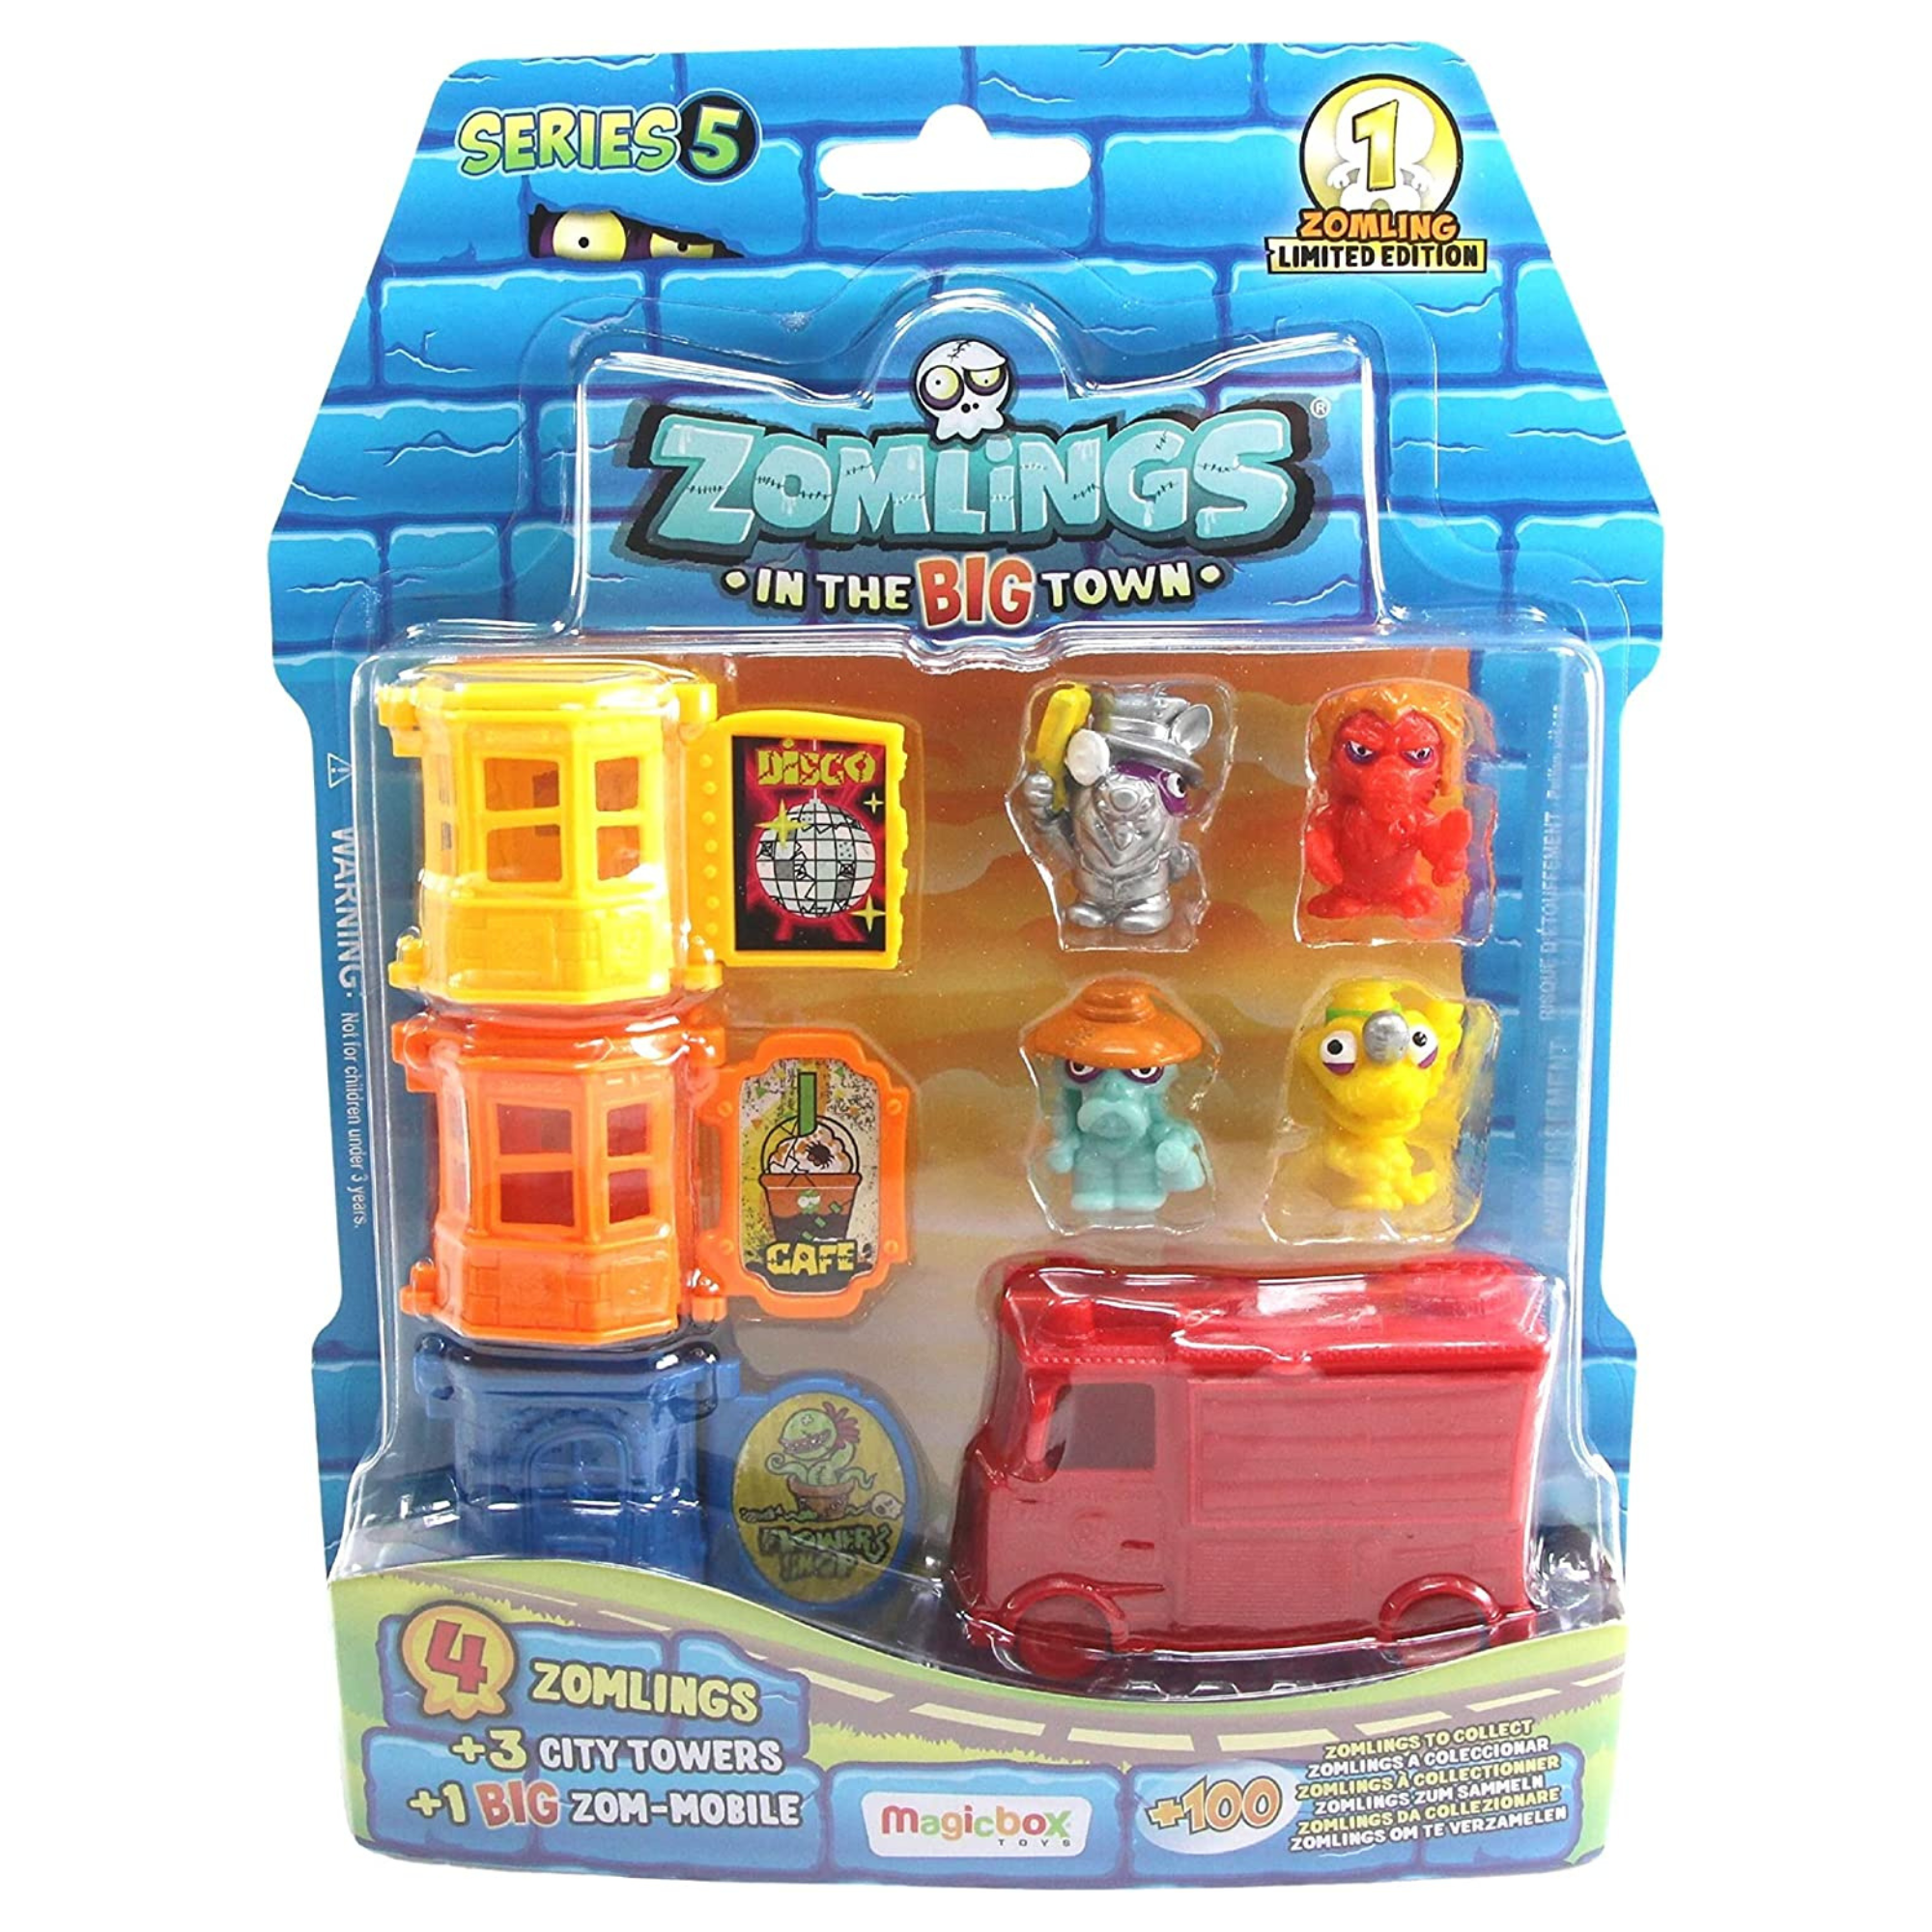 Zomlings in the BIG Town Series 5 Blister Pack - Includes 4 Zomlings, 3 City Towers & Zom Mobile Fire Engine - Toptoys2u